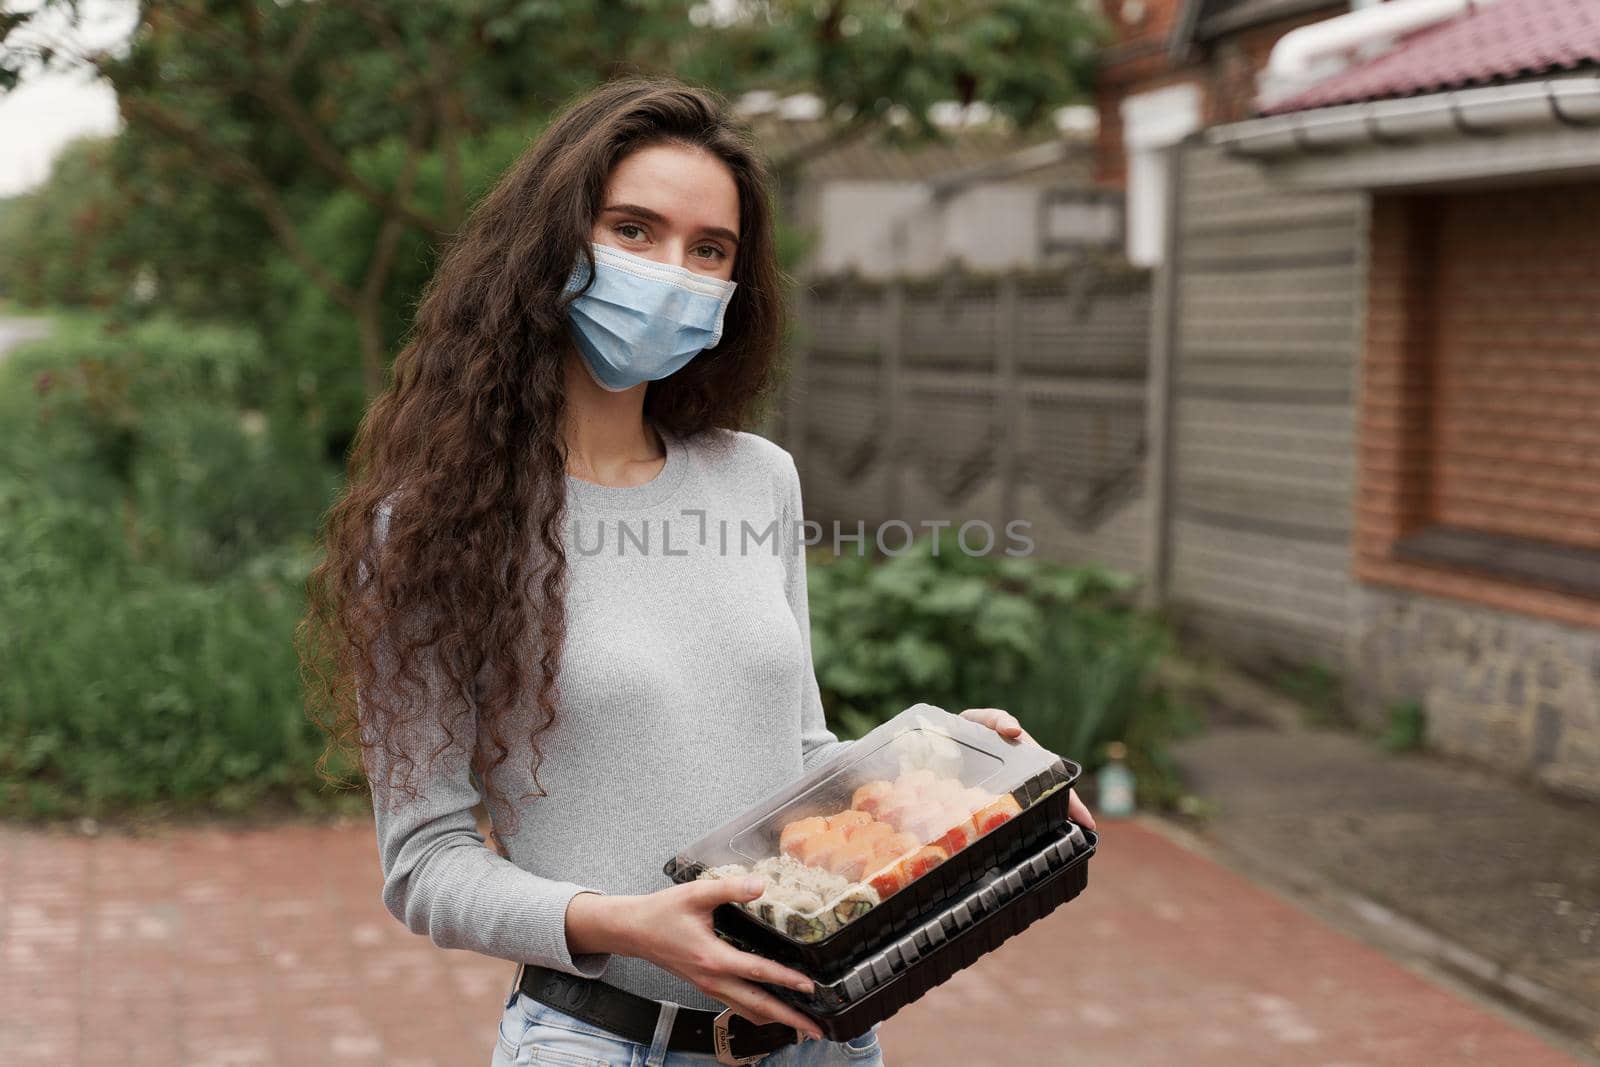 Sushi set in box healthy food delivery service by car. Girl courier in medical mask with 2 sushi boxes stands in front of car